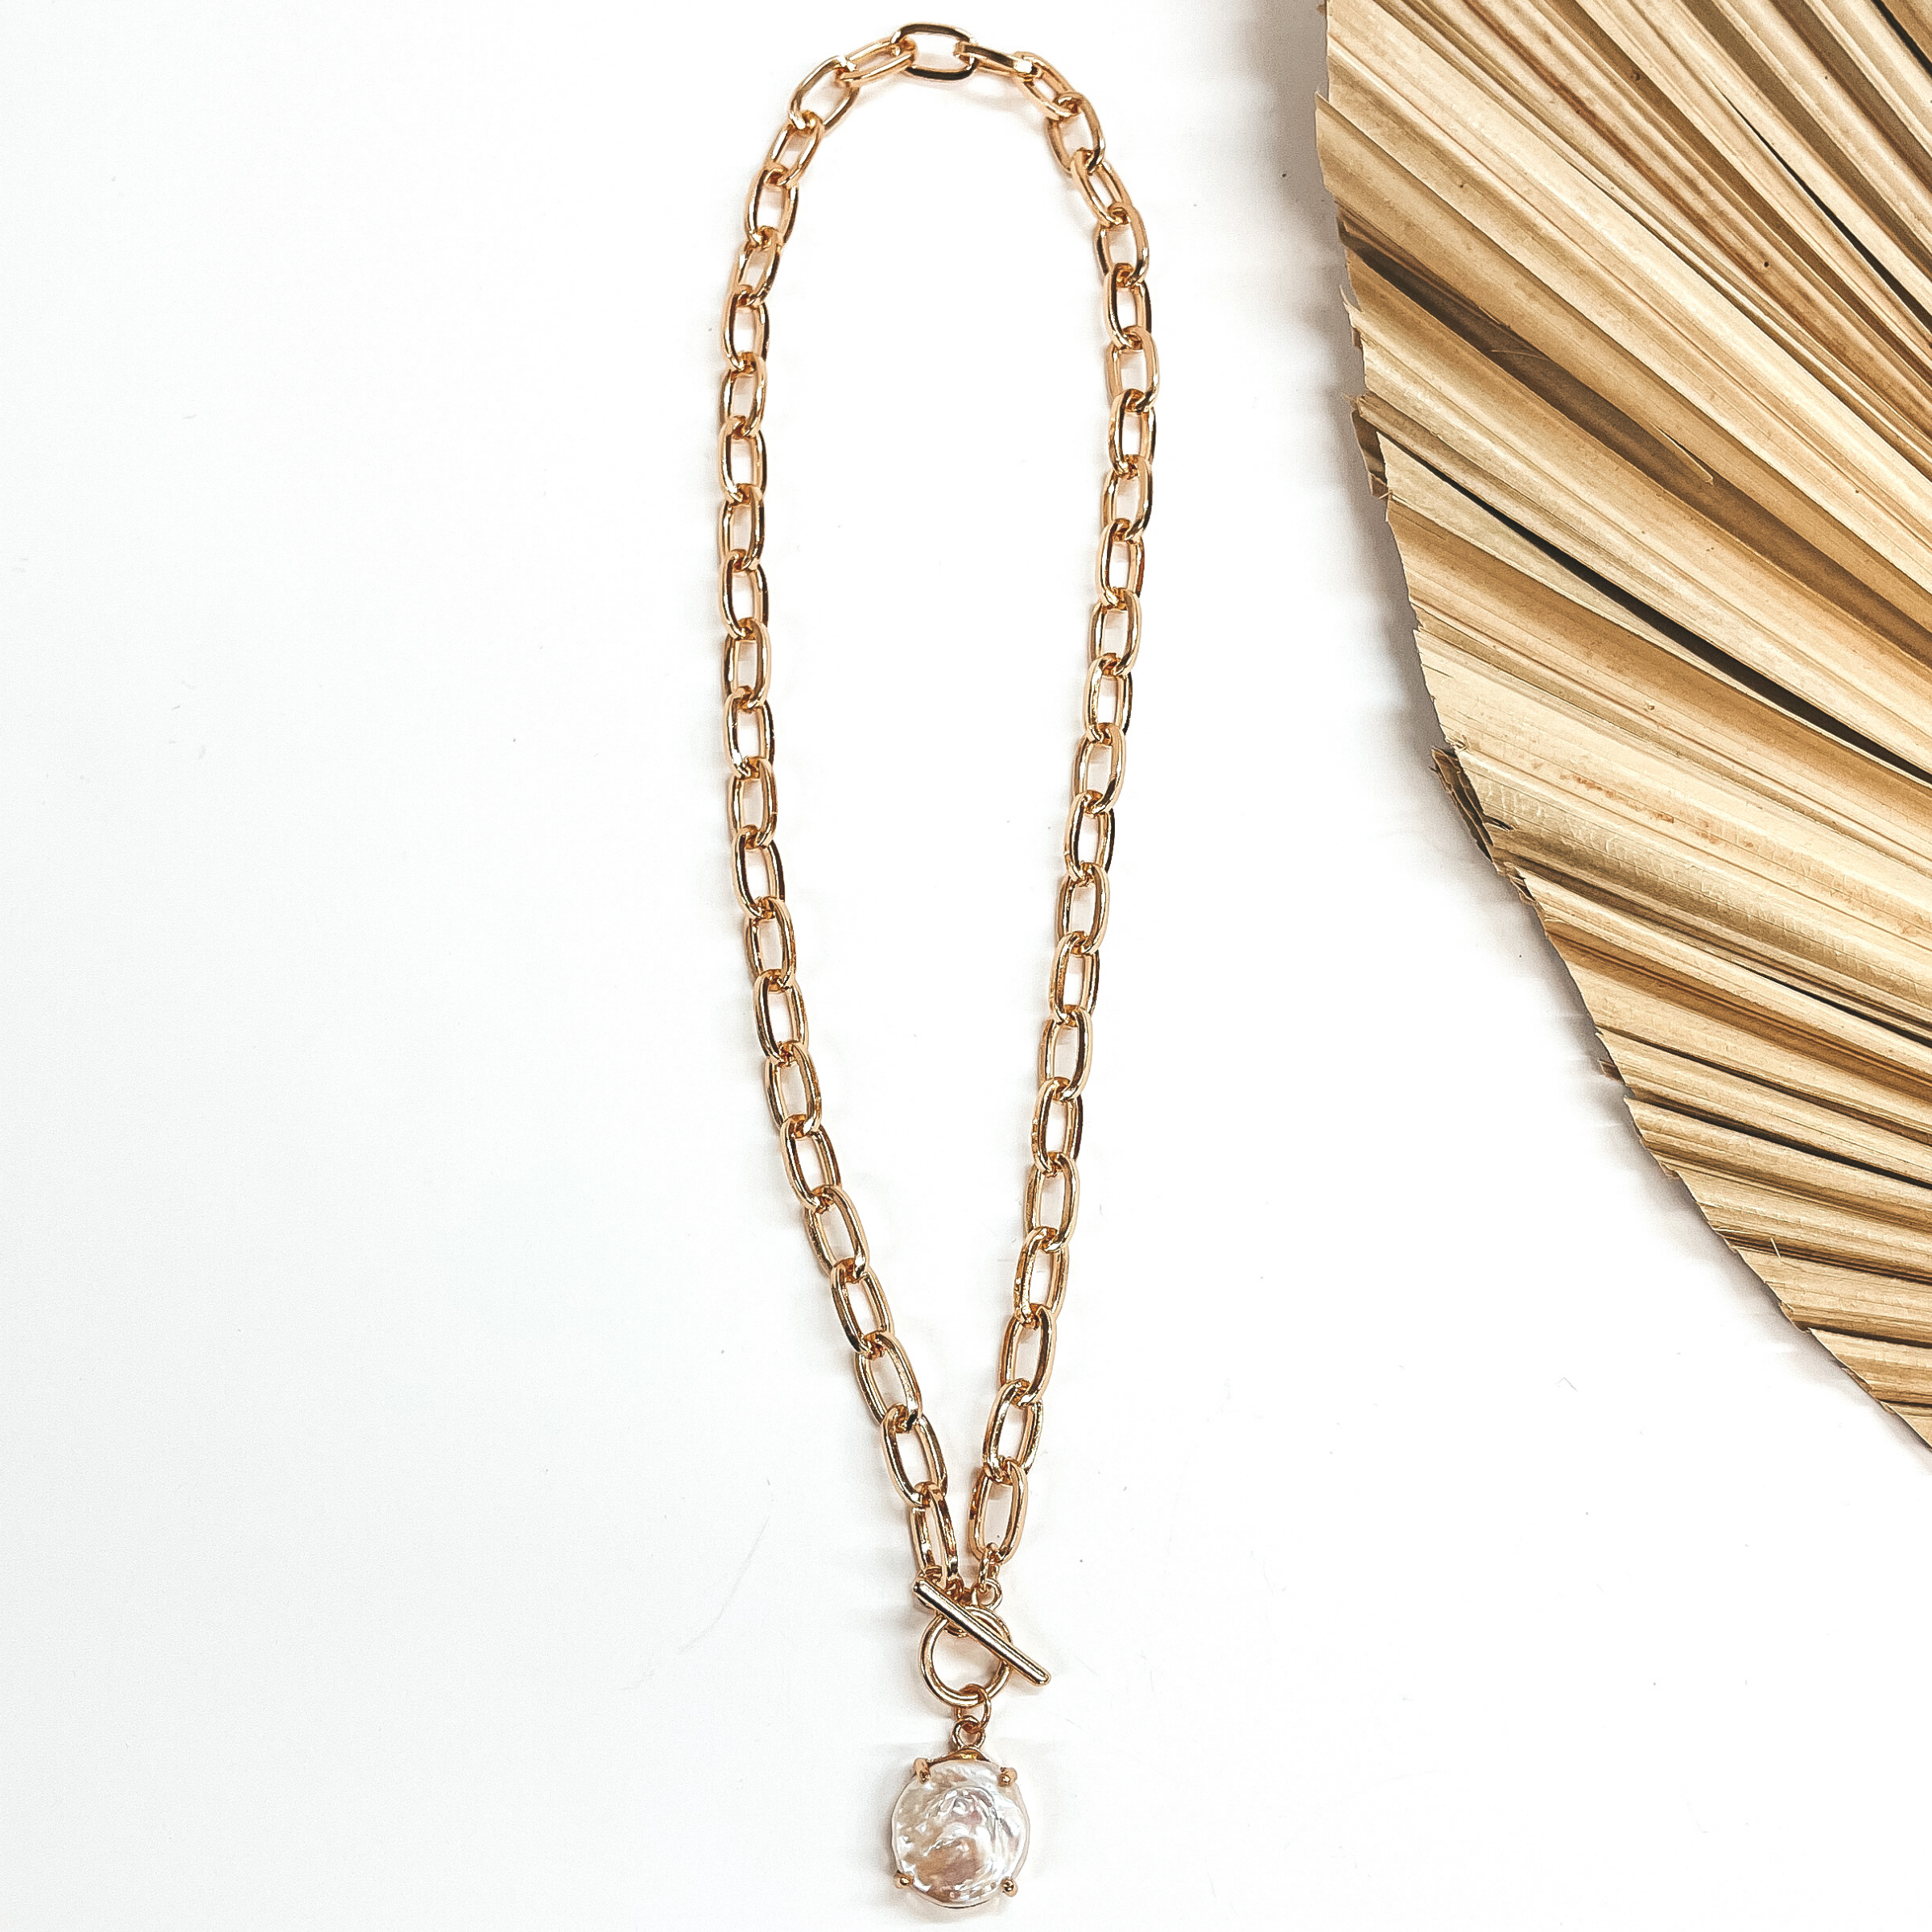 Gold thick chain with a toggle clasp and  freshwater pearl pendant. Taken on a white background and a dried up palm leaf in the side as decor.